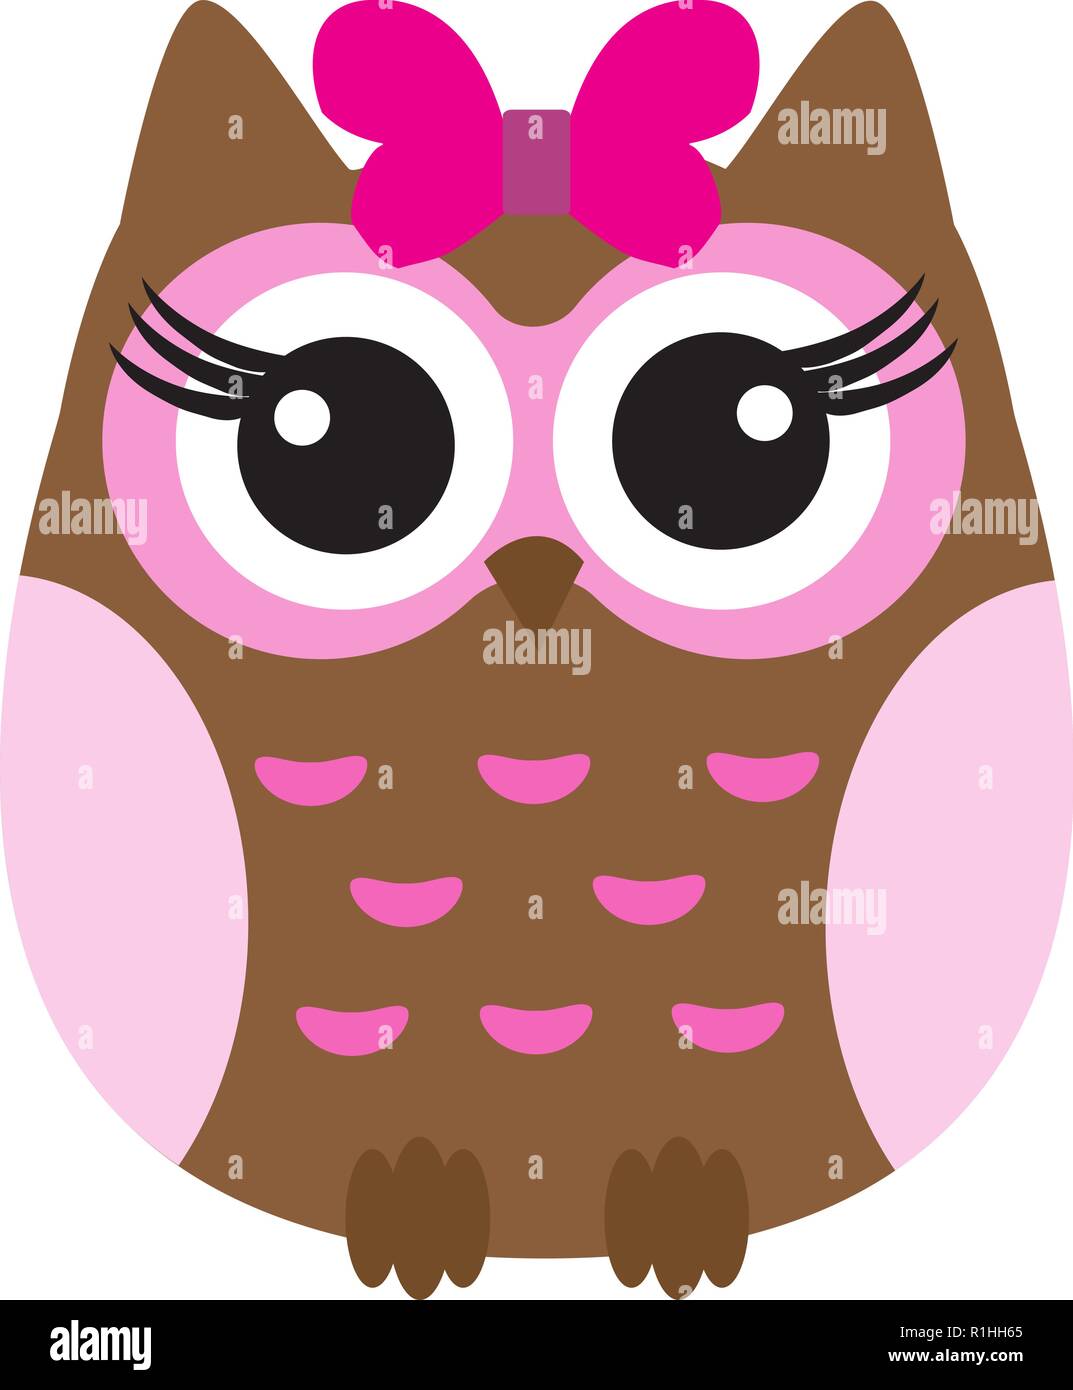 Download vector illustration of a cute baby owl Stock Vector Image ...